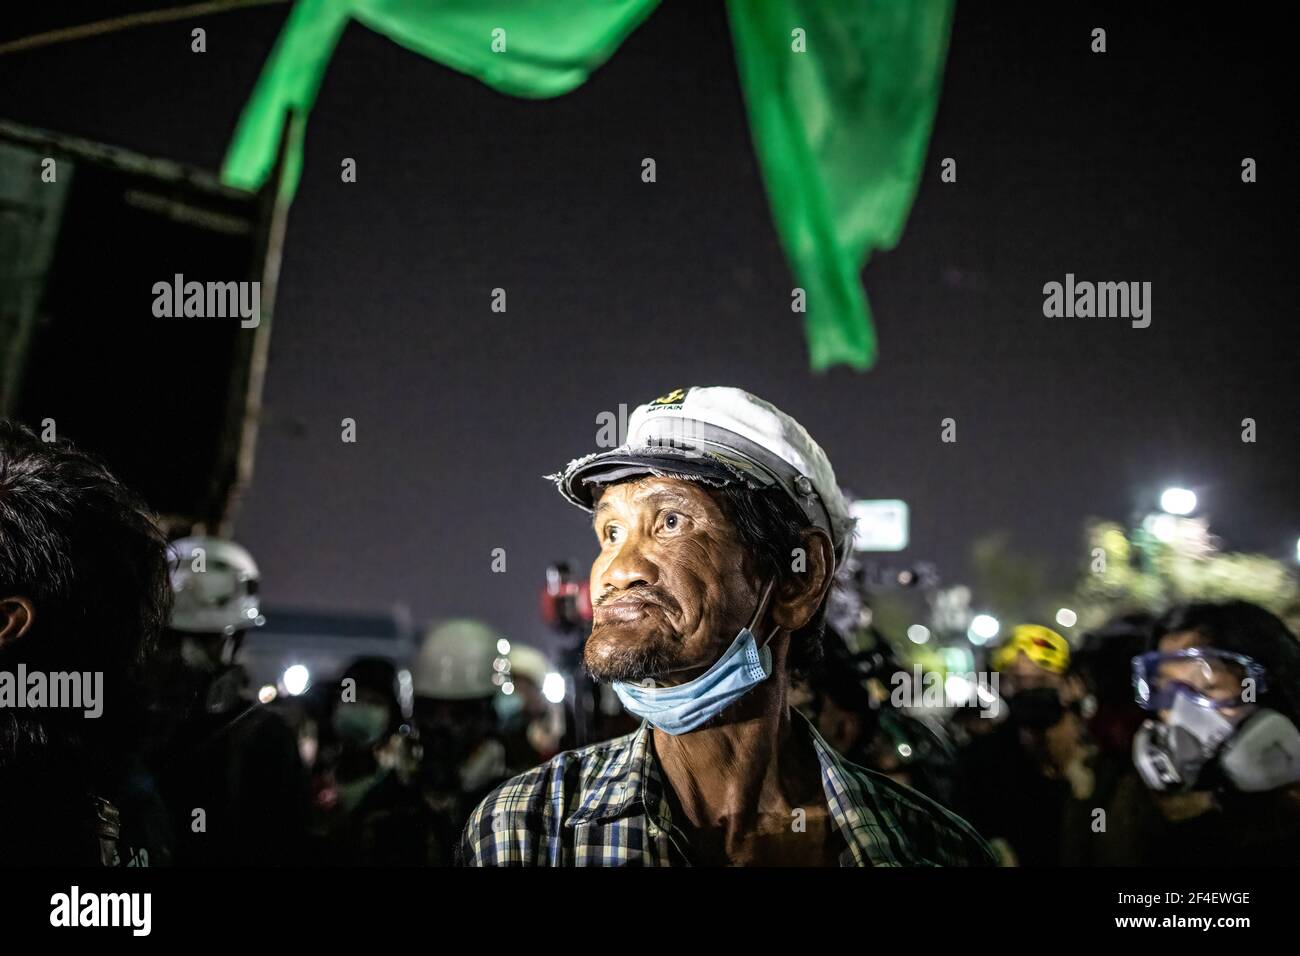 A pro democracy protester looks at the police during an anti-government demonstration in Bangkok. Thousands of pro-democracy protesters gathered near the Grand Palace in Sanam Luang demanding the resignation of Thailand Prime Minister and the reform of the monarchy. The protesters also denounced the use of the Lese Majeste law under the section 112 of the penal code. The protest organized by REDEM (Restart Democracy) ended up with several clashes, the use of water cannon, tear gas and rubber bullet, which had left several injured. (Photo by Geem Drake / SOPA Images/Sipa USA) Stock Photo